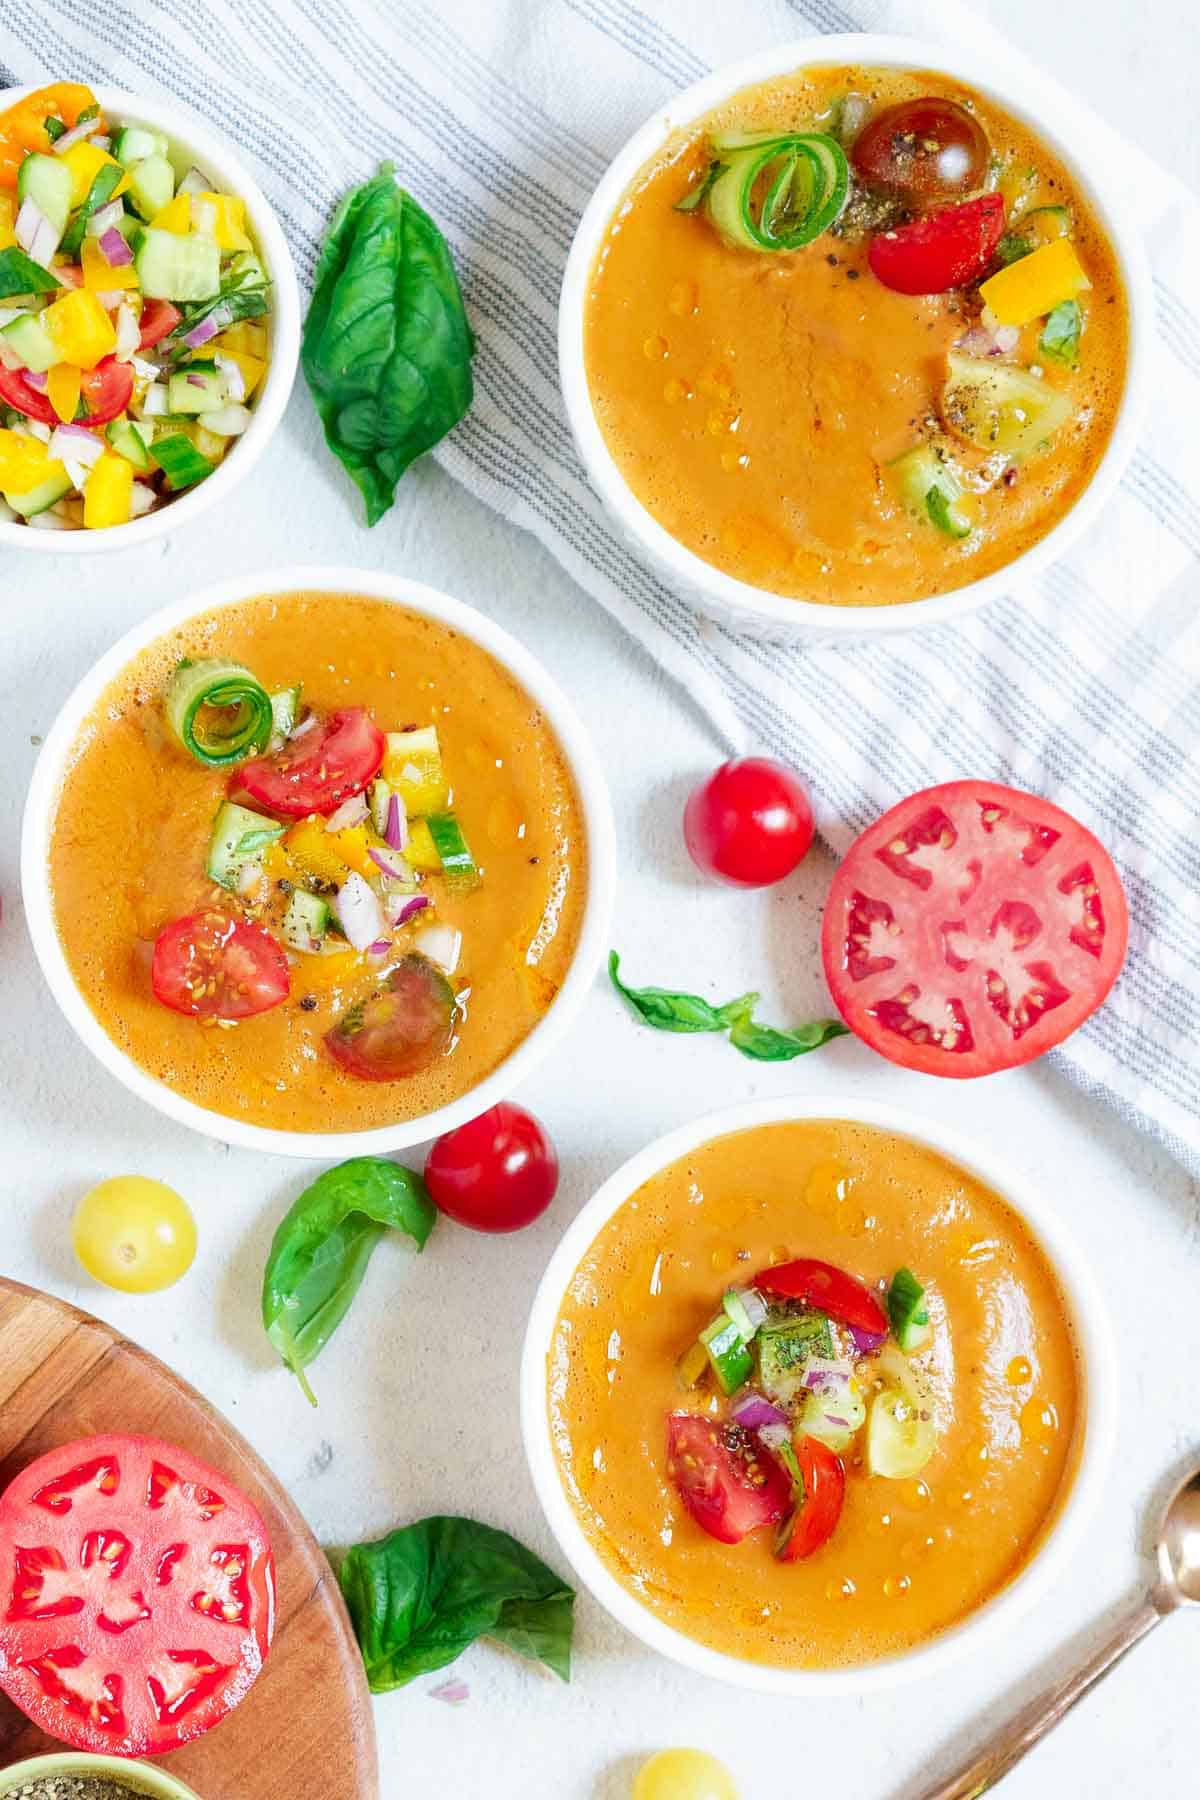 3 bowls of gazpacho soup with a salad.